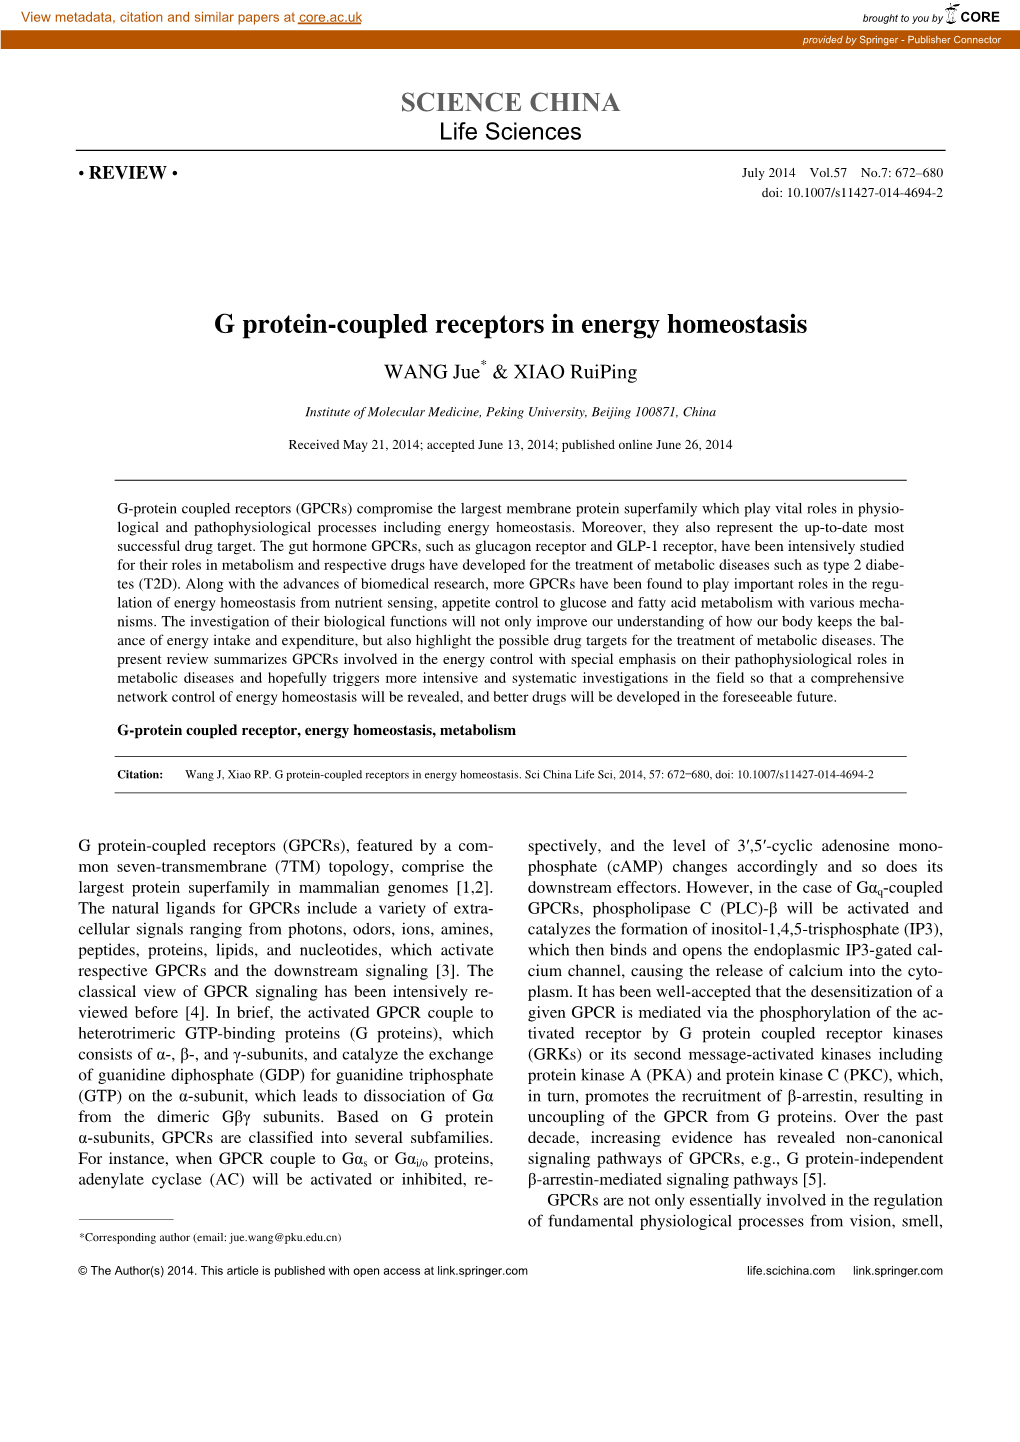 SCIENCE CHINA G Protein-Coupled Receptors in Energy Homeostasis